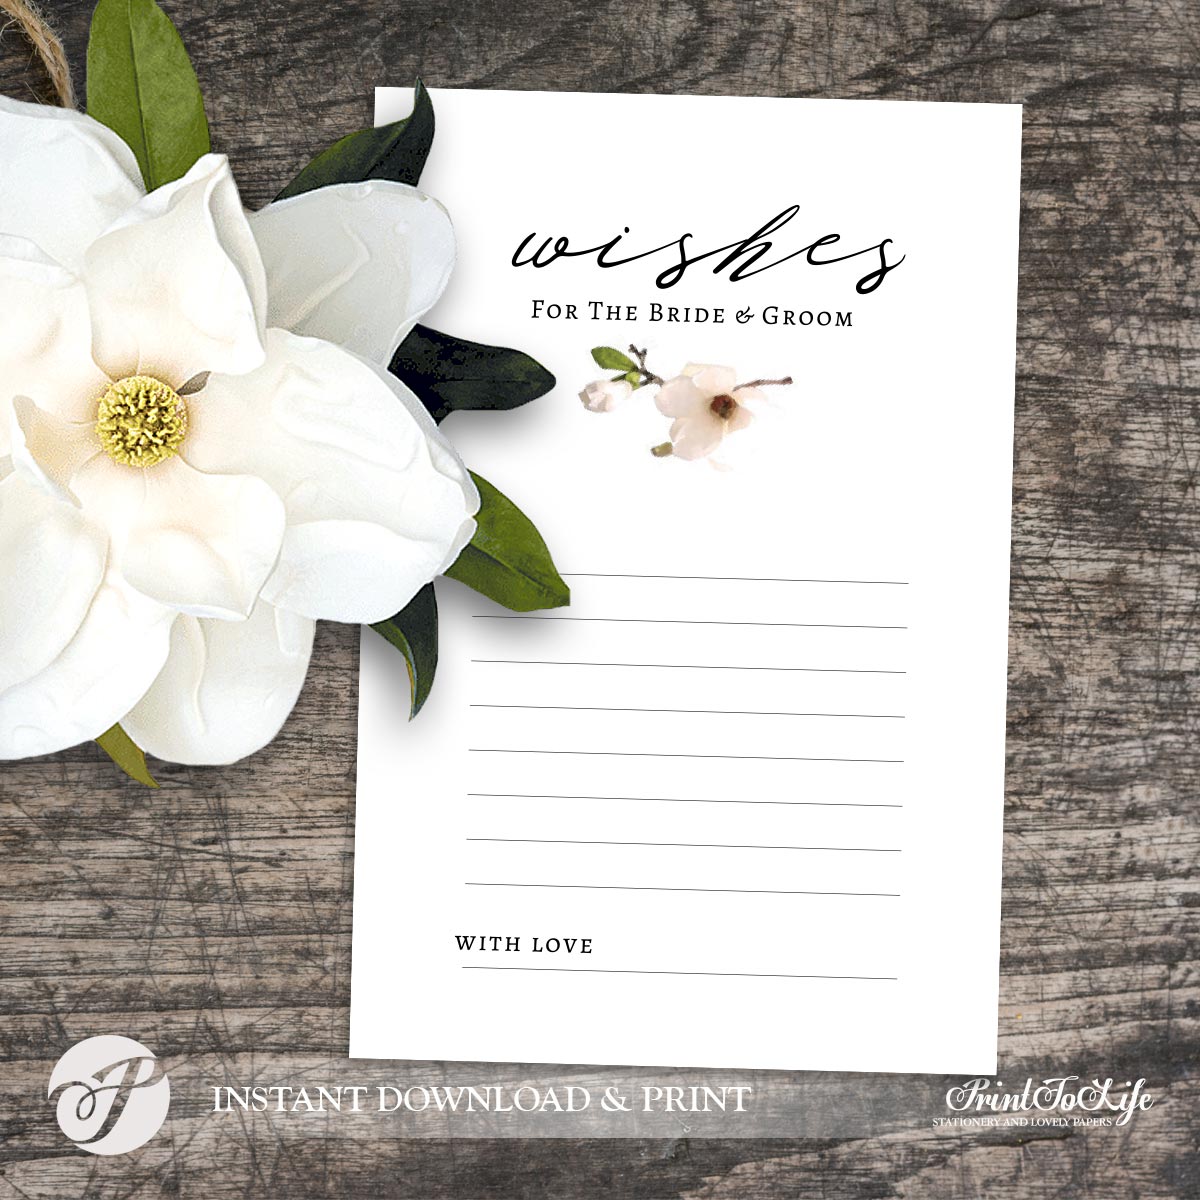 Wedding Wishes Card, Wishes for the Bride and Groom, #Magnolia Collection  printable template - by Printolife With Marriage Advice Cards Templates